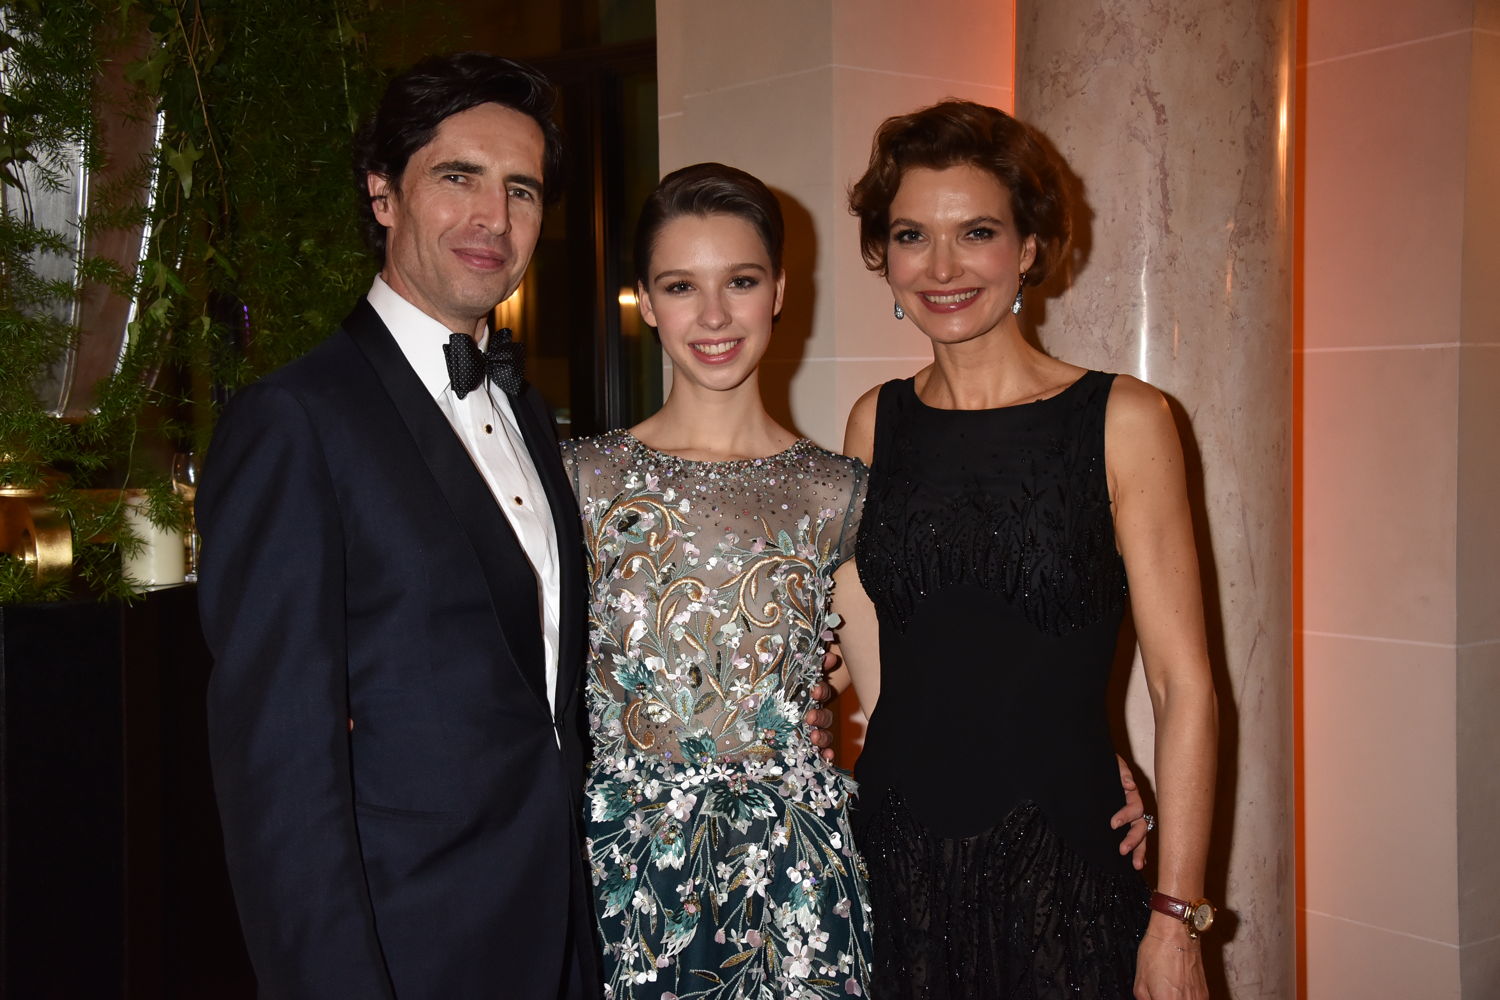 Countess Angélique de Limburg Stirum (in Georges Hobeika and jewelry by Payal New York) with her parents Count Thierry and Countess Katia de Limburg Sitrum, Photo by Jean Luce Huré